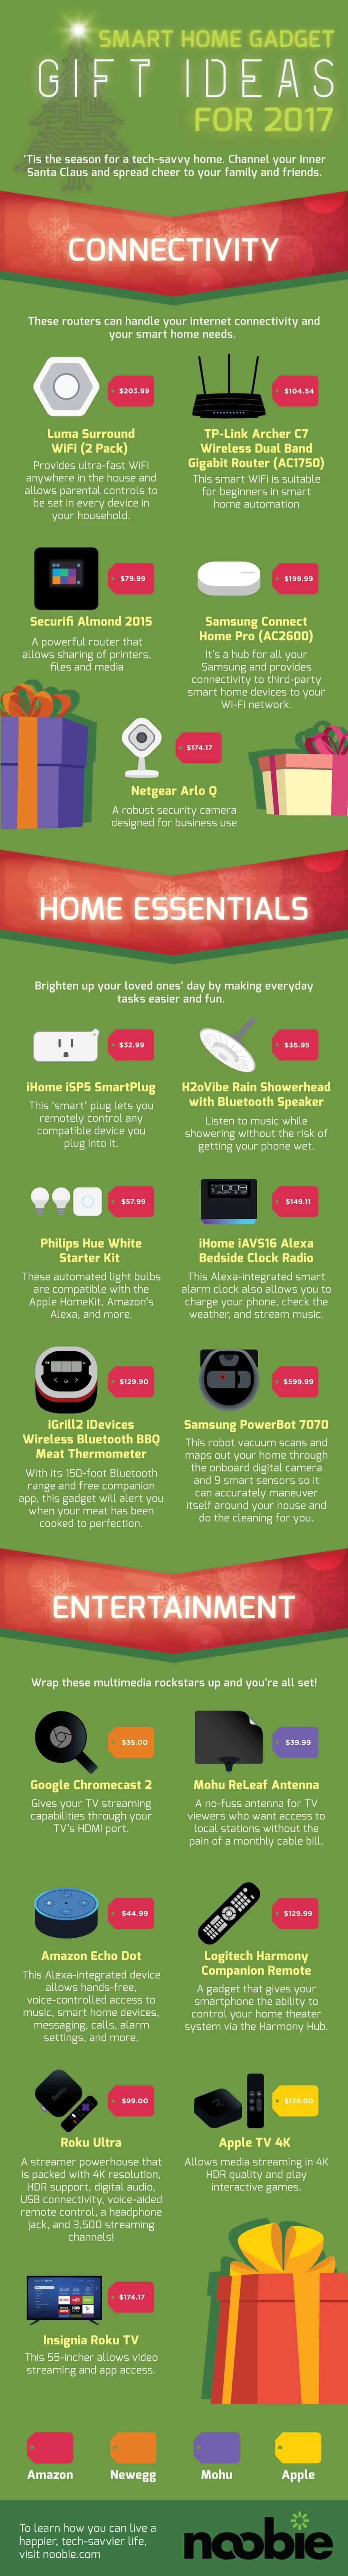 Smart Home Gadgets Perfect As Gifts For Holiday Season | Noobie’s Best of 2017